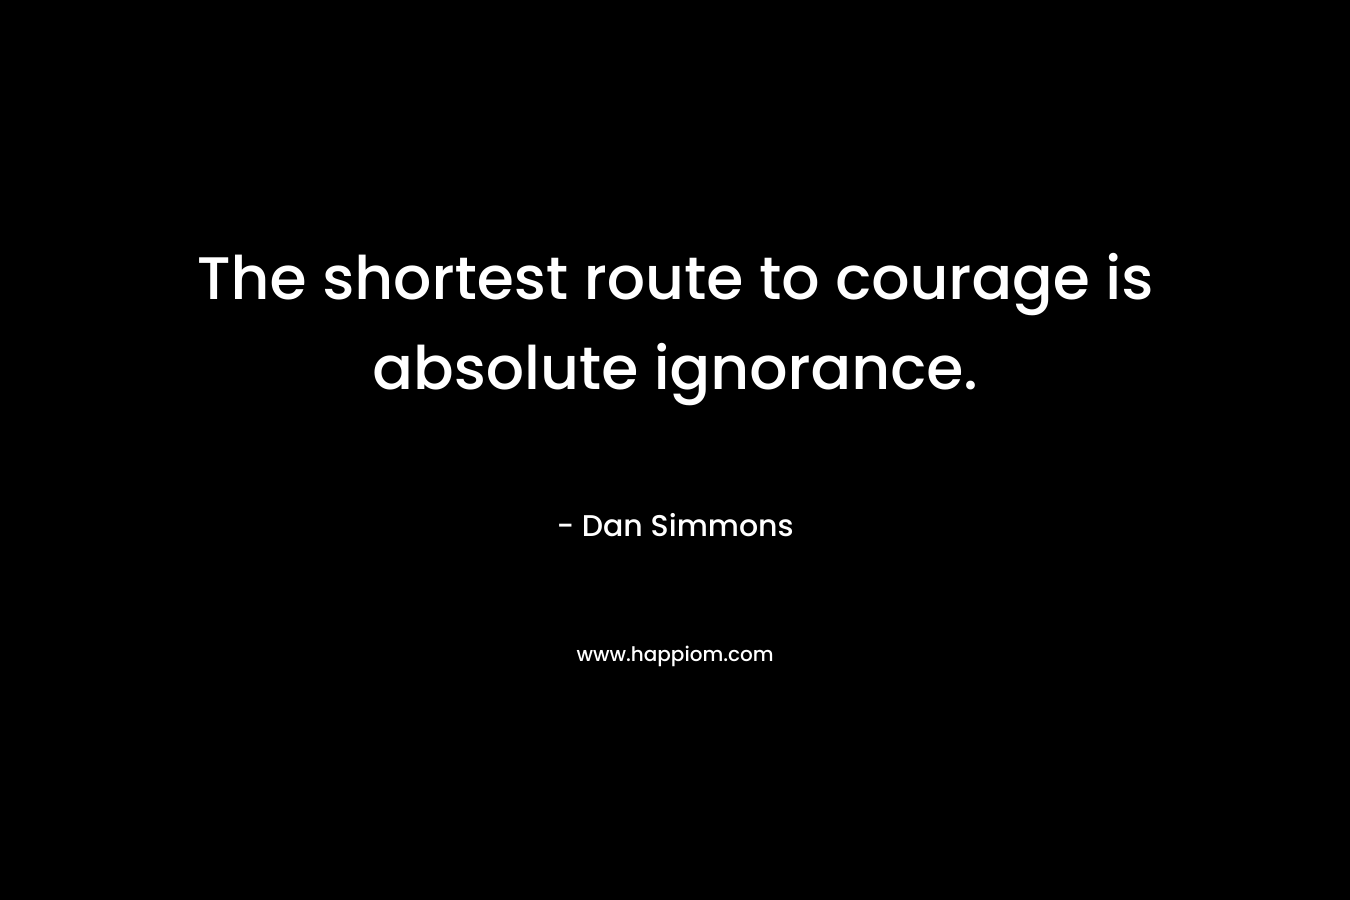 The shortest route to courage is absolute ignorance. – Dan Simmons